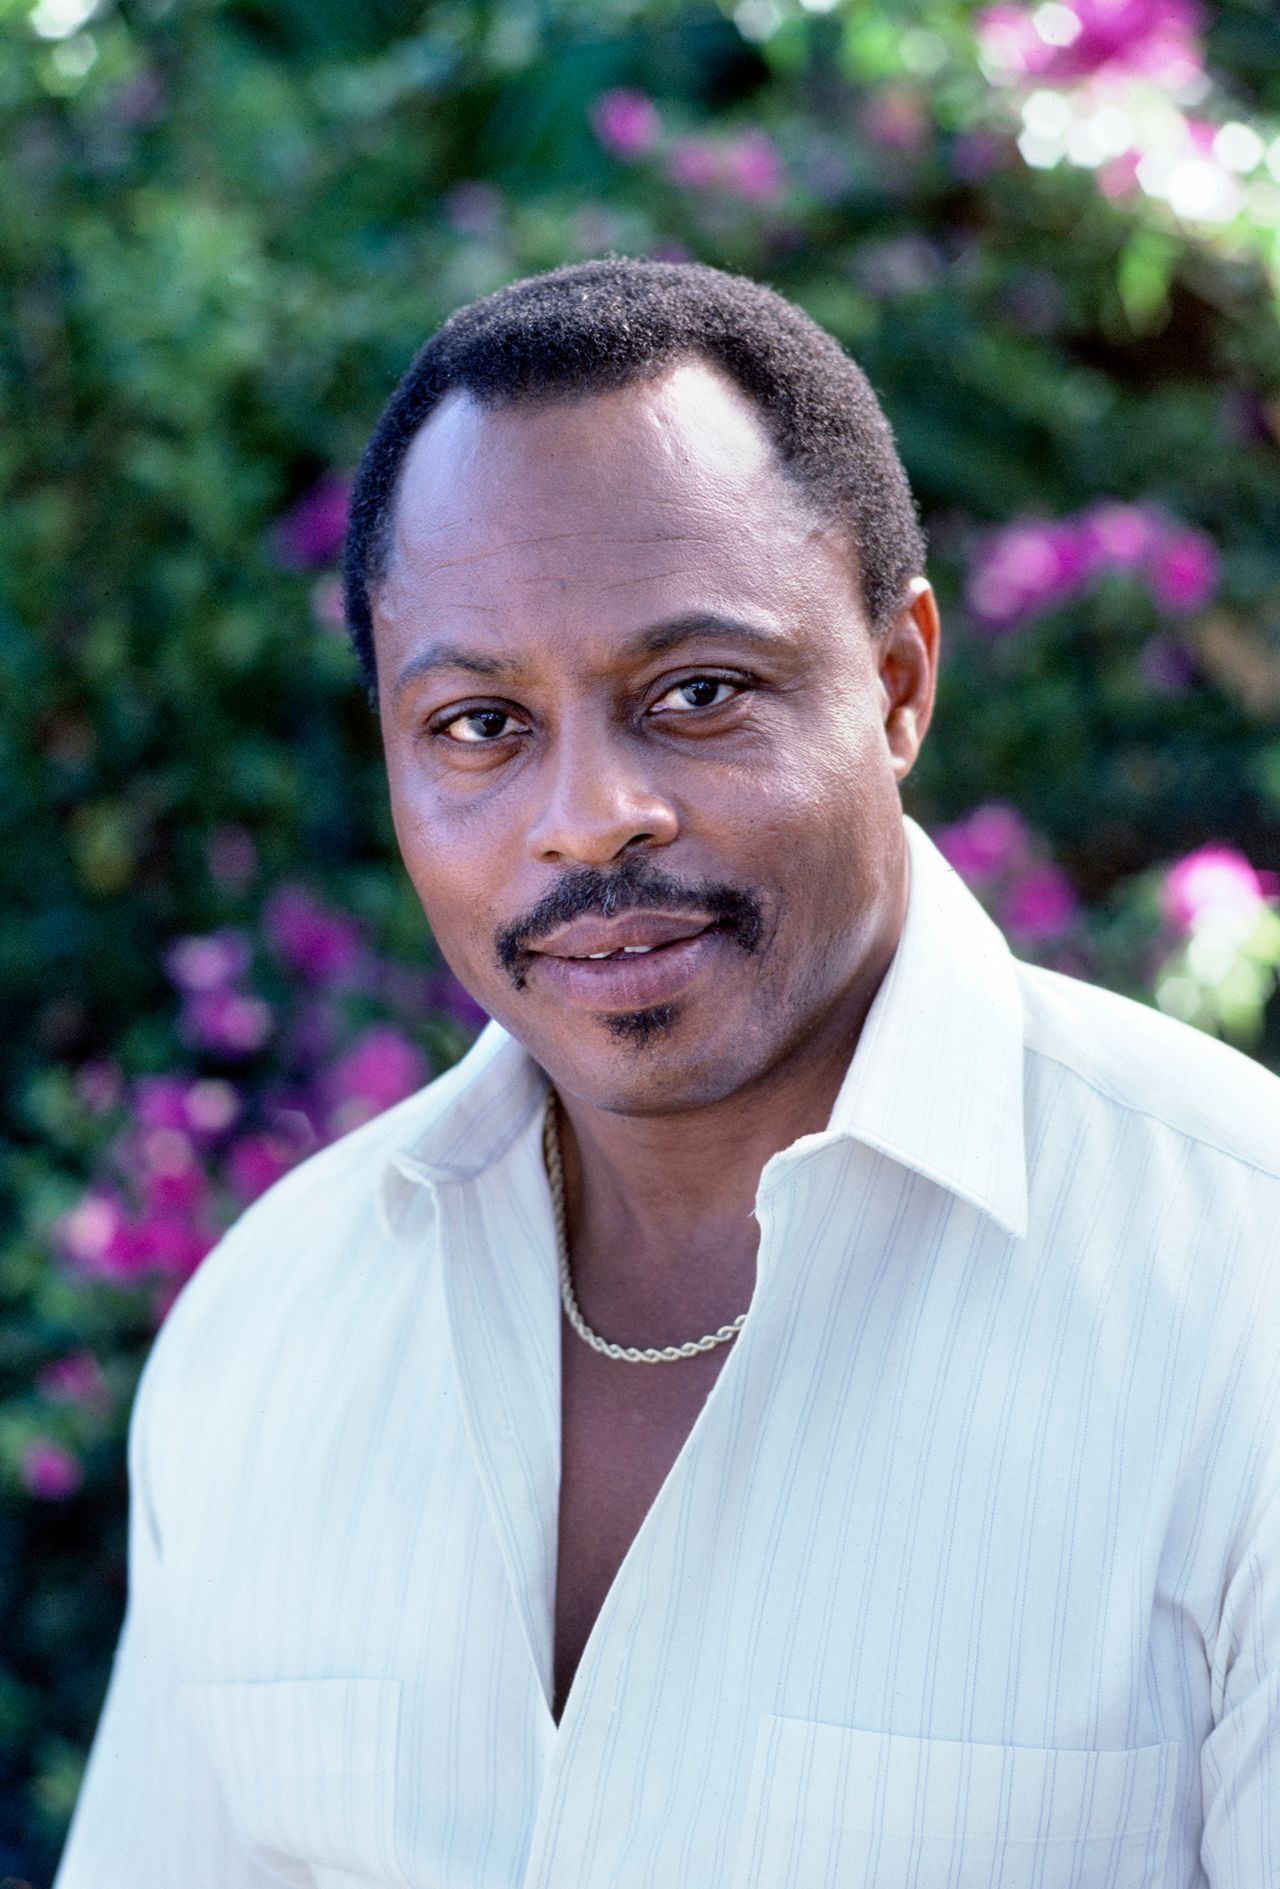 Actor Roger E. Mosley, best known for his role as the helicopter pilot Theodore 